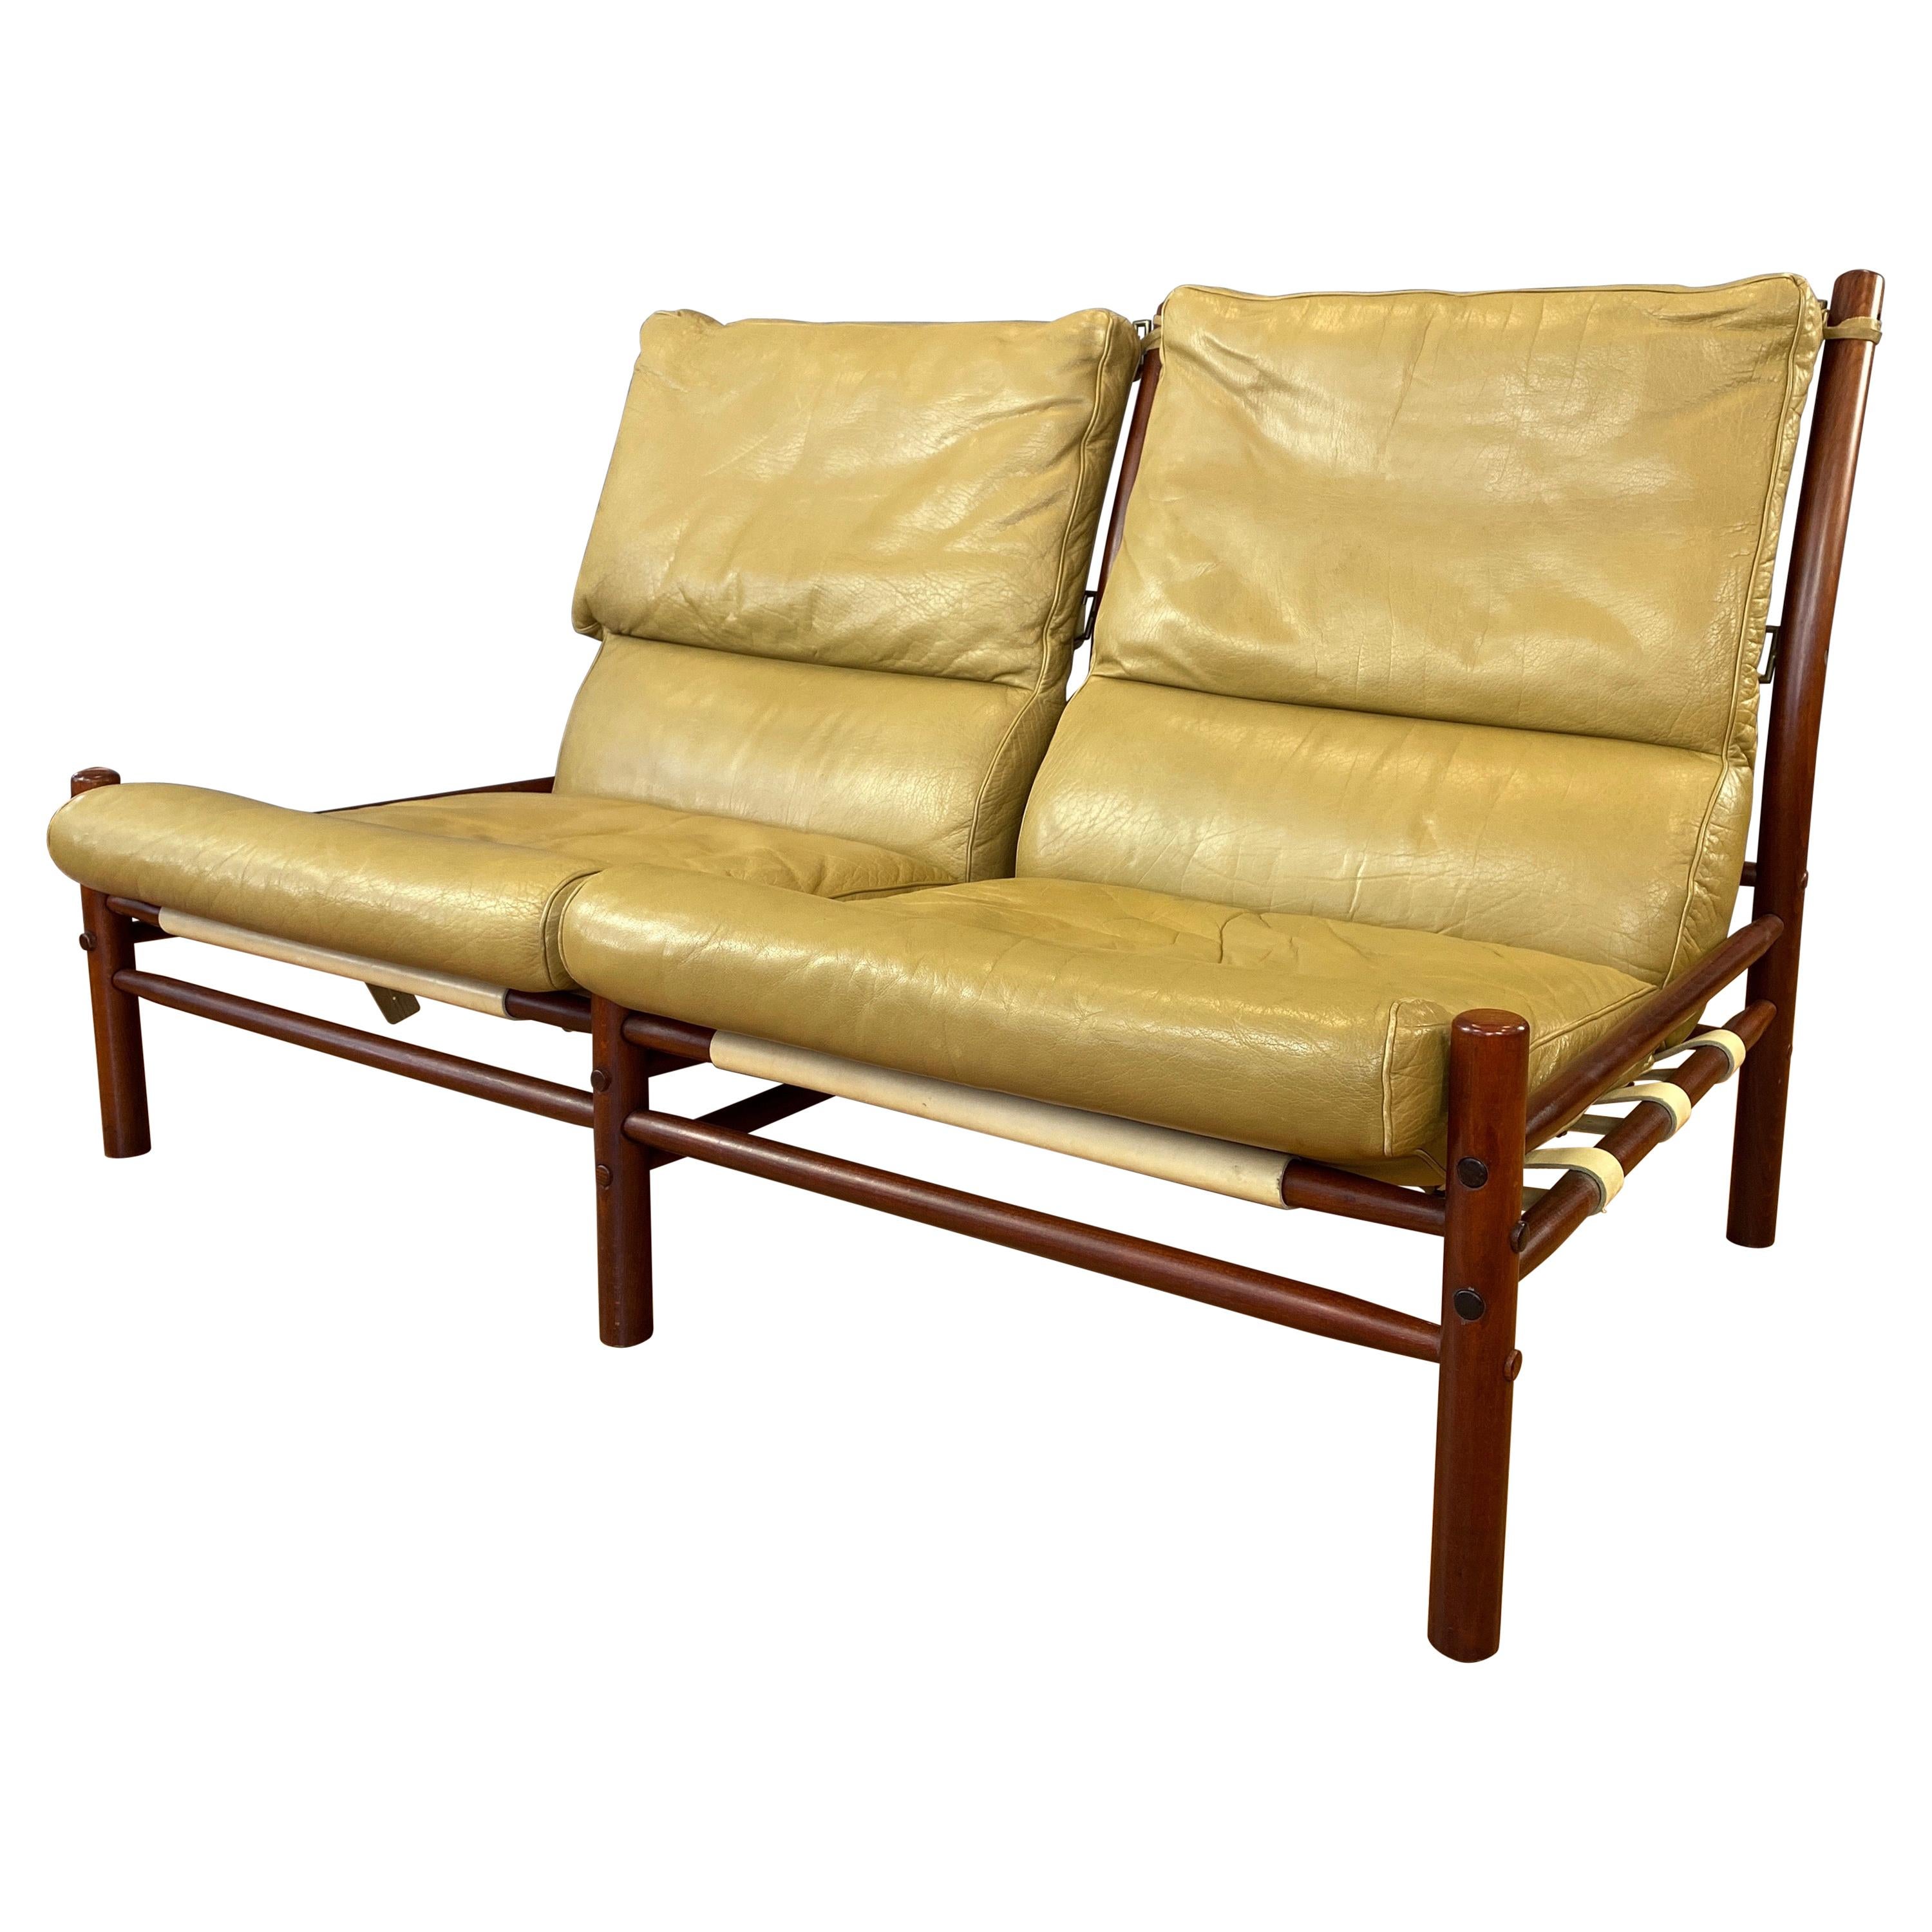 Arne Norell Inca Armless Settee in Teak-Colored Beech and Tan Leather, 1970s